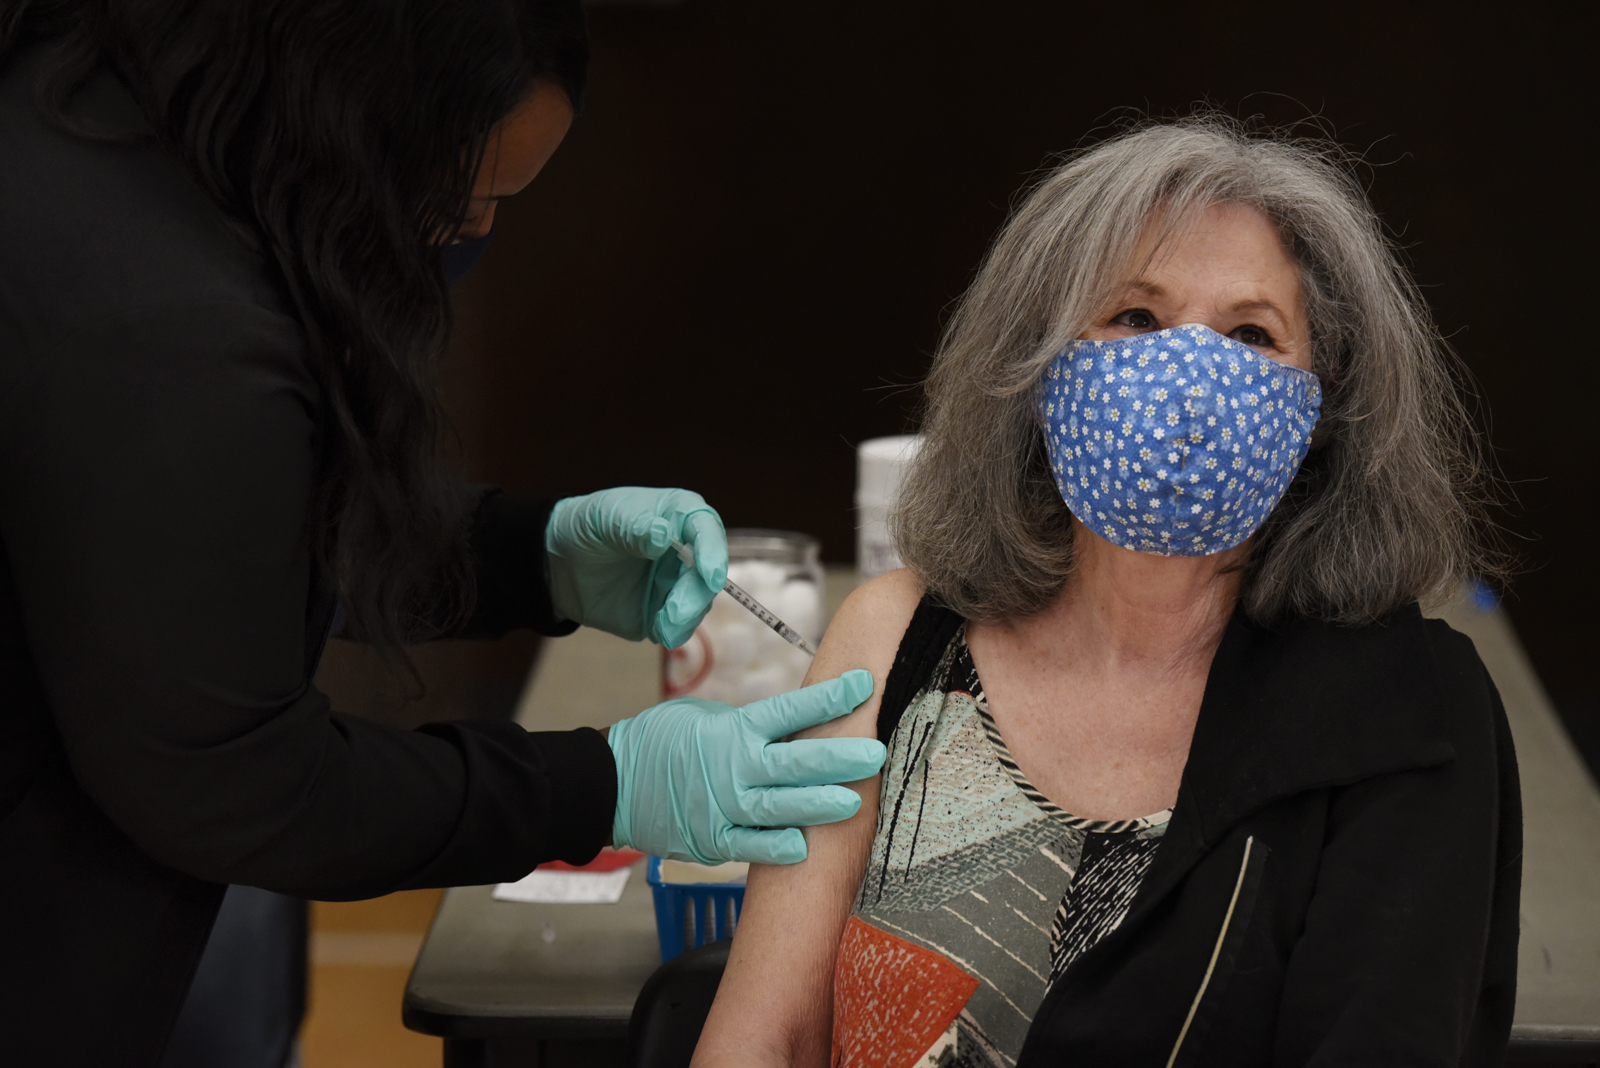 An community member wearing a floral face mask as she sits and receives a vaccination.